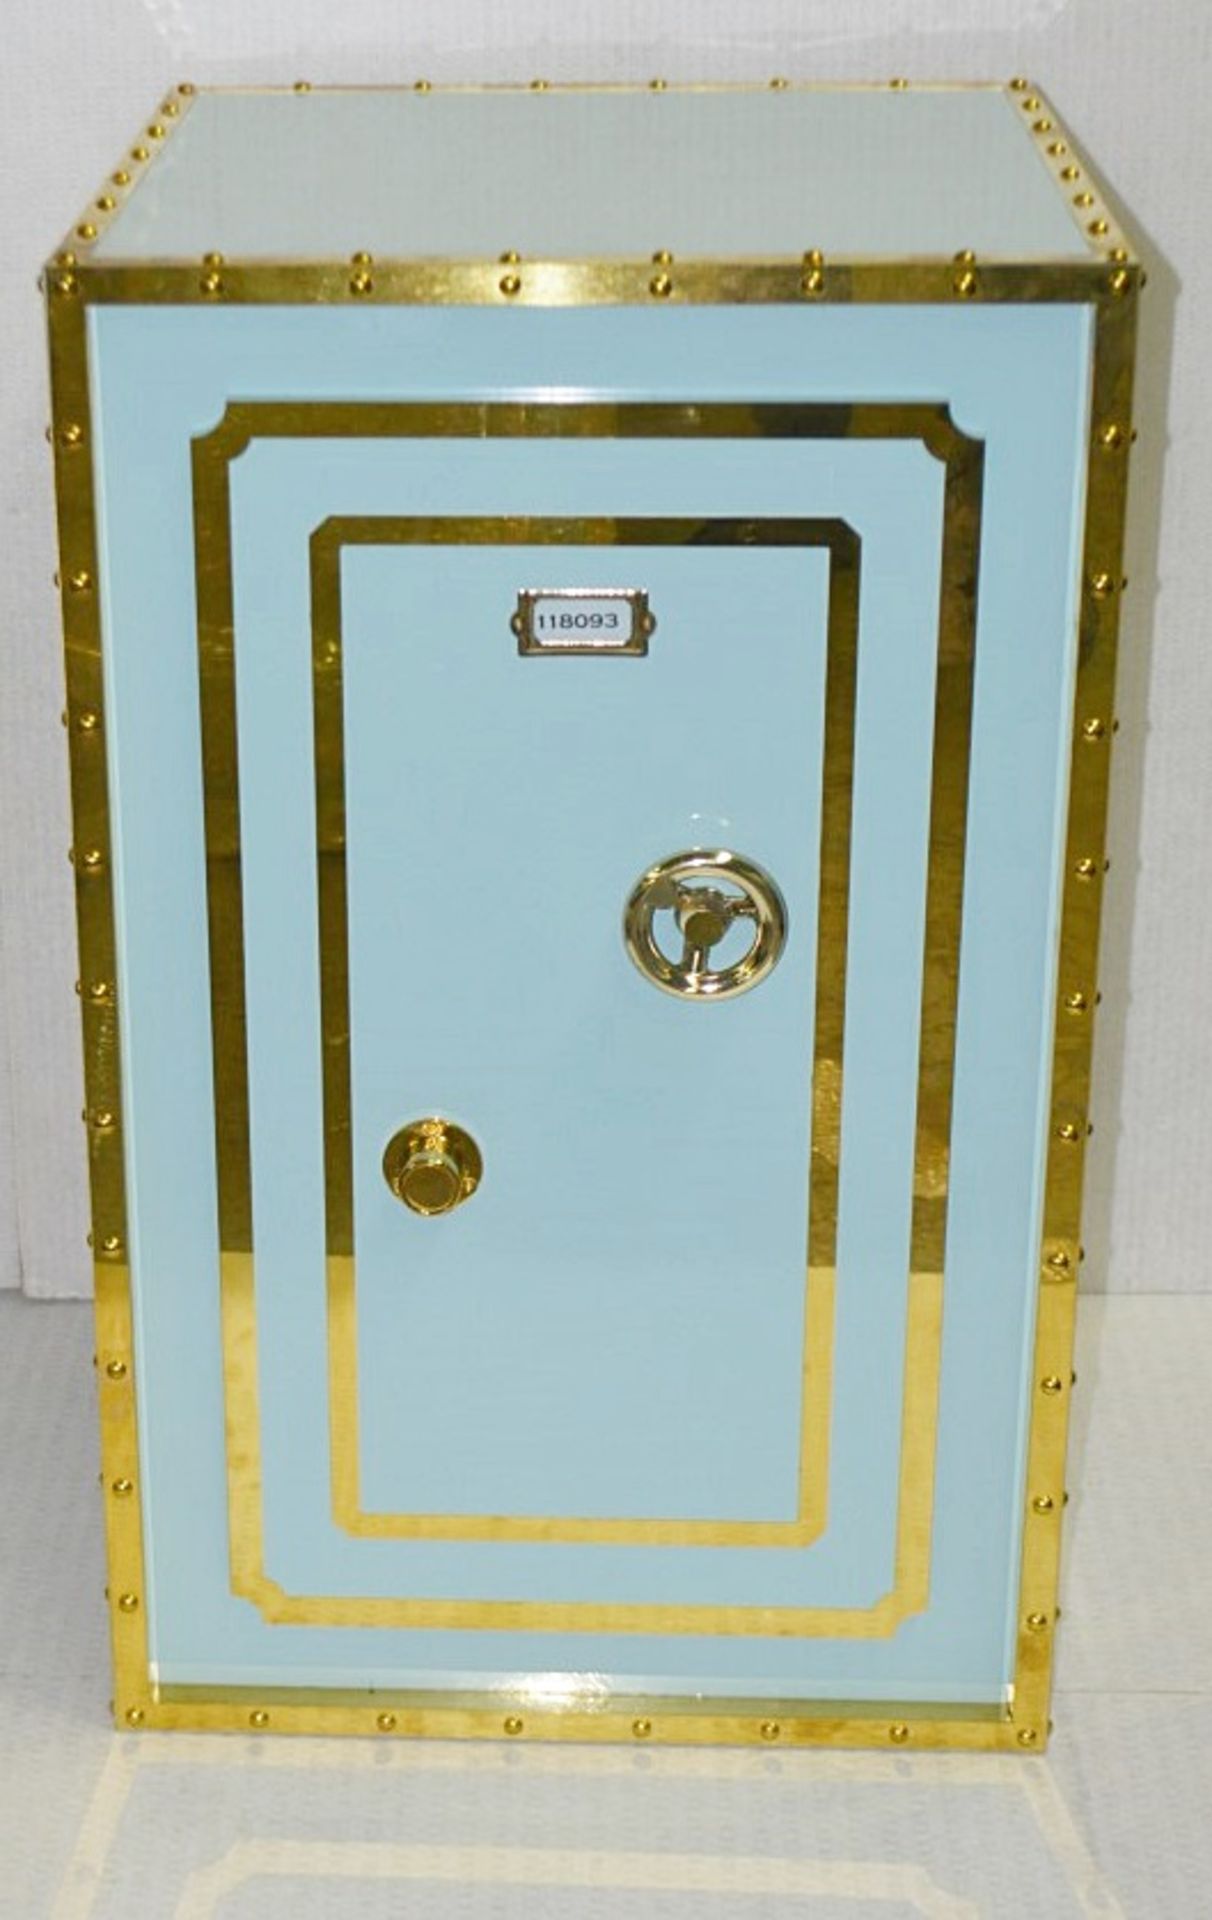 1 x Opulent Bank Vault Safe-style Shop Display Plinth In Tiffany Blue With Gold Trim - Image 2 of 6